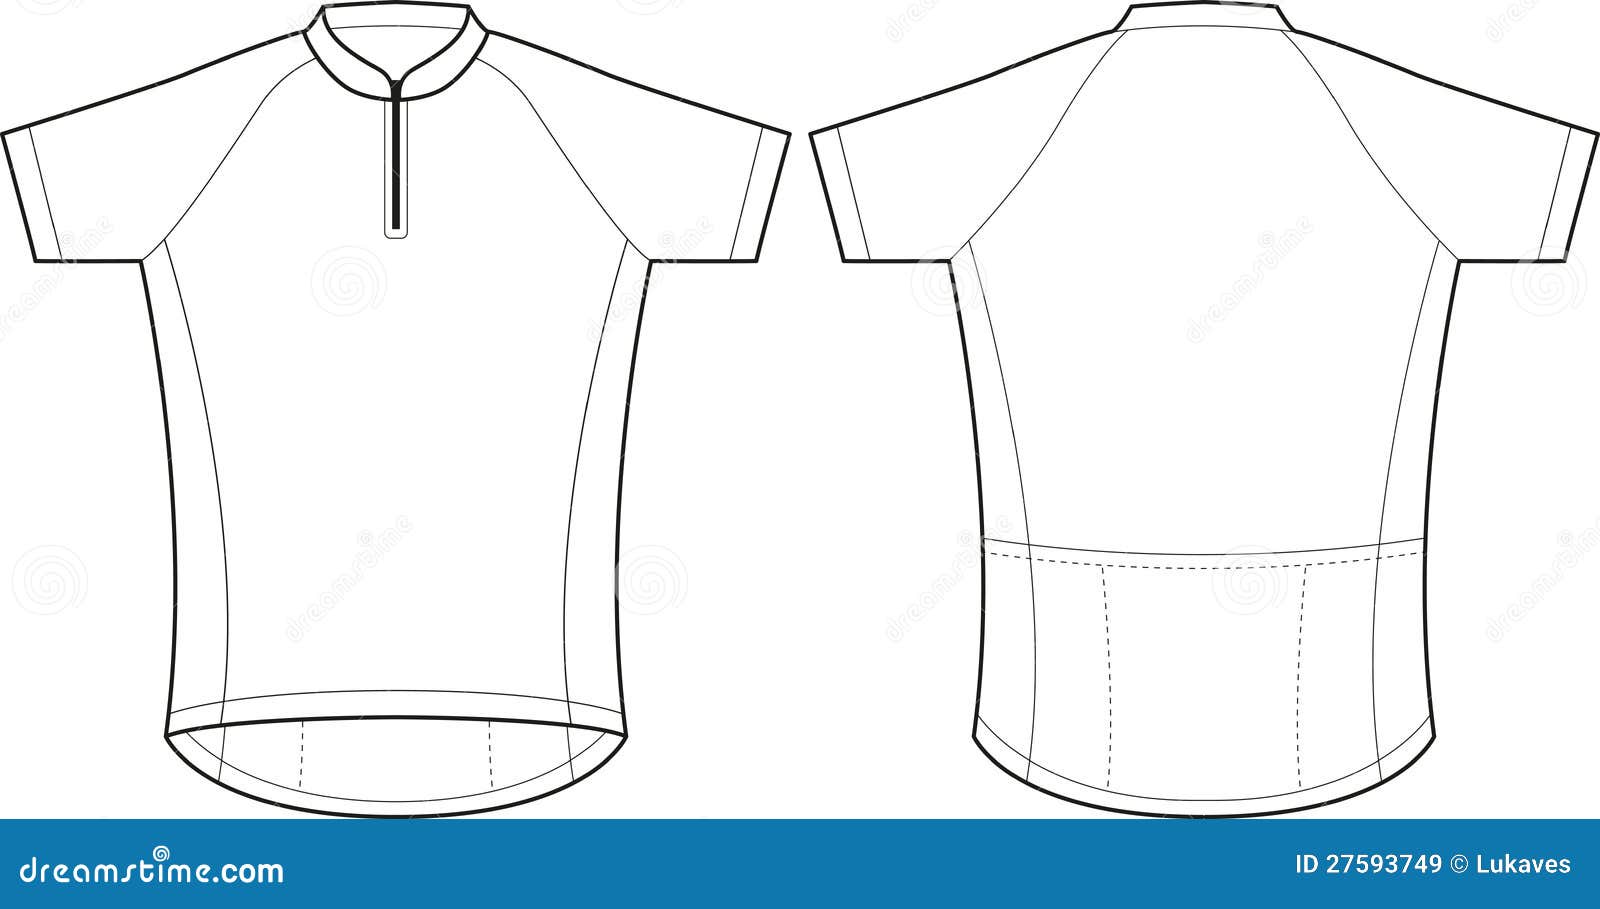 Cycling Jersey Template Stock Illustrations 2 077 Cycling Jersey Template Stock Illustrations Vectors Clipart Dreamstime